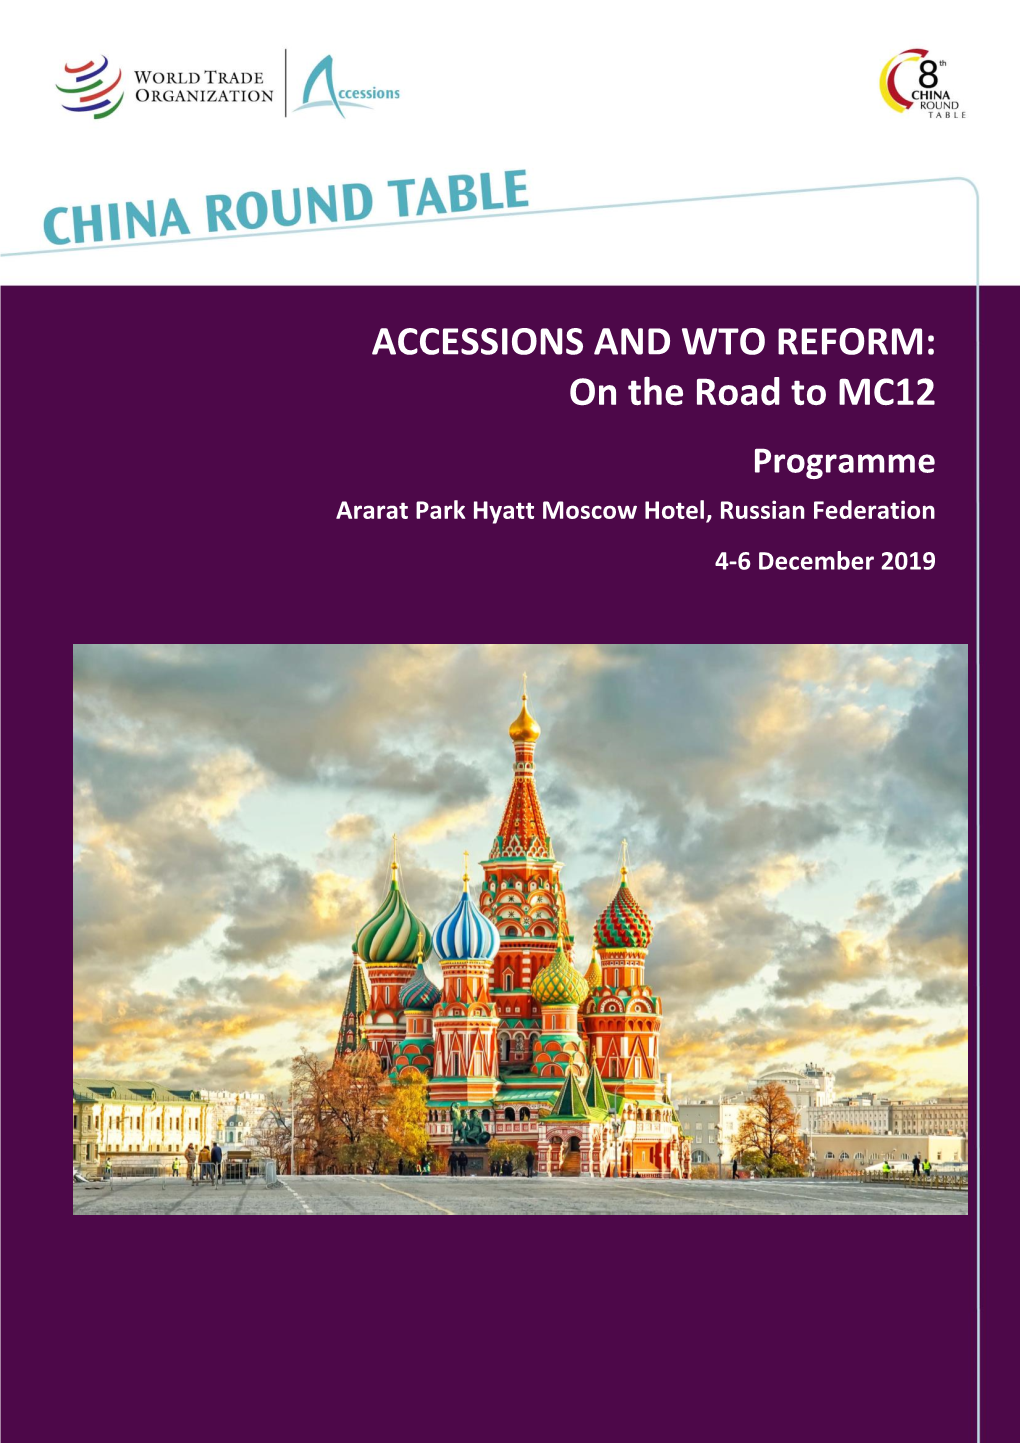 ACCESSIONS and WTO REFORM: on the Road to MC12 Programme Ararat Park Hyatt Moscow Hotel, Russian Federation 4-6 December 2019